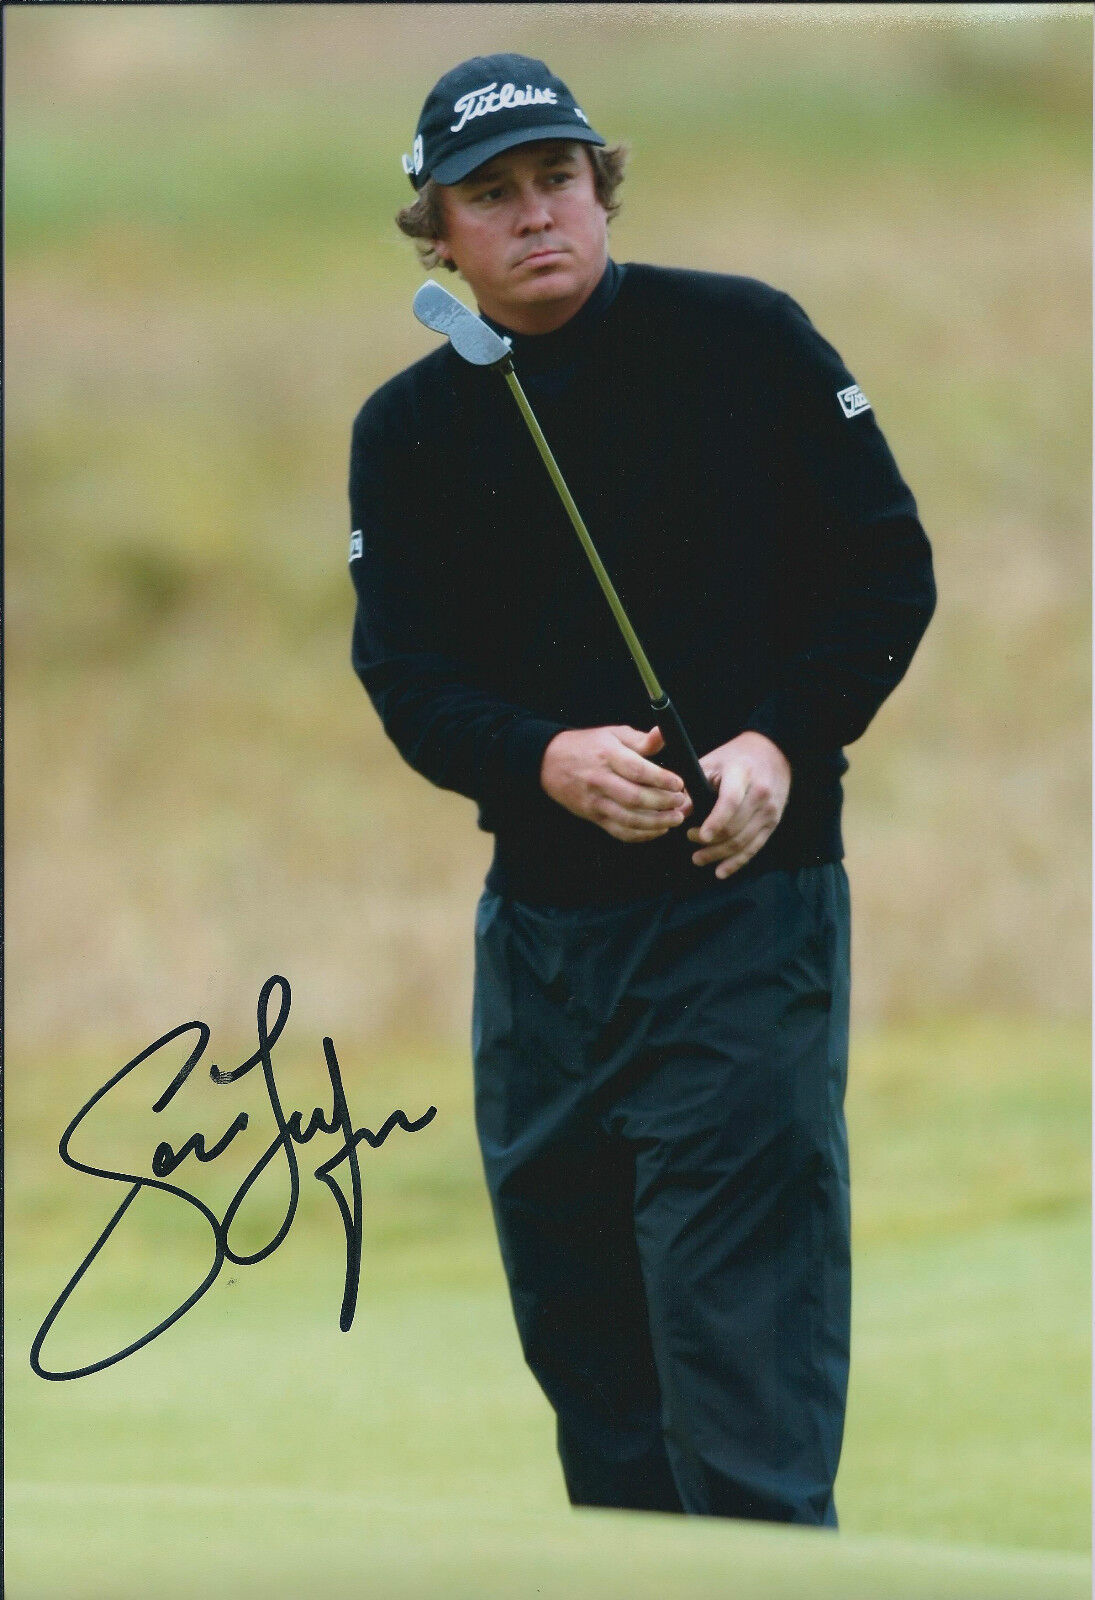 Jason DUFNER SIGNED 12x8 Photo Poster painting AFTAL Autograph COA US Ryder Cup Player GOLF